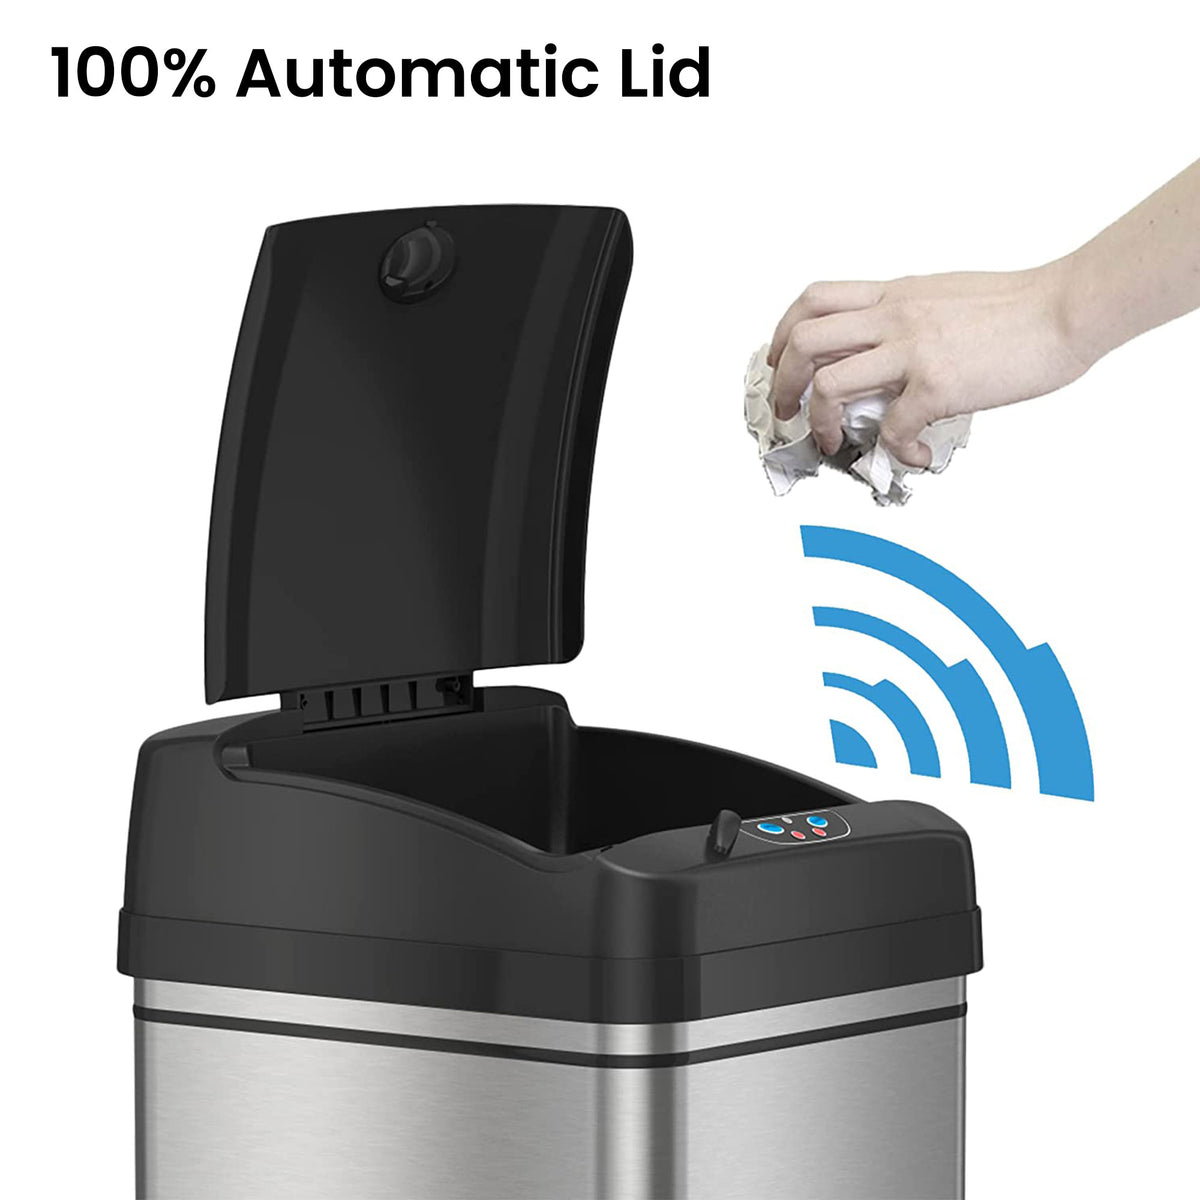 13 Gallon Sensor Trash Can with AC Power Adapter 100% Automatic Lid